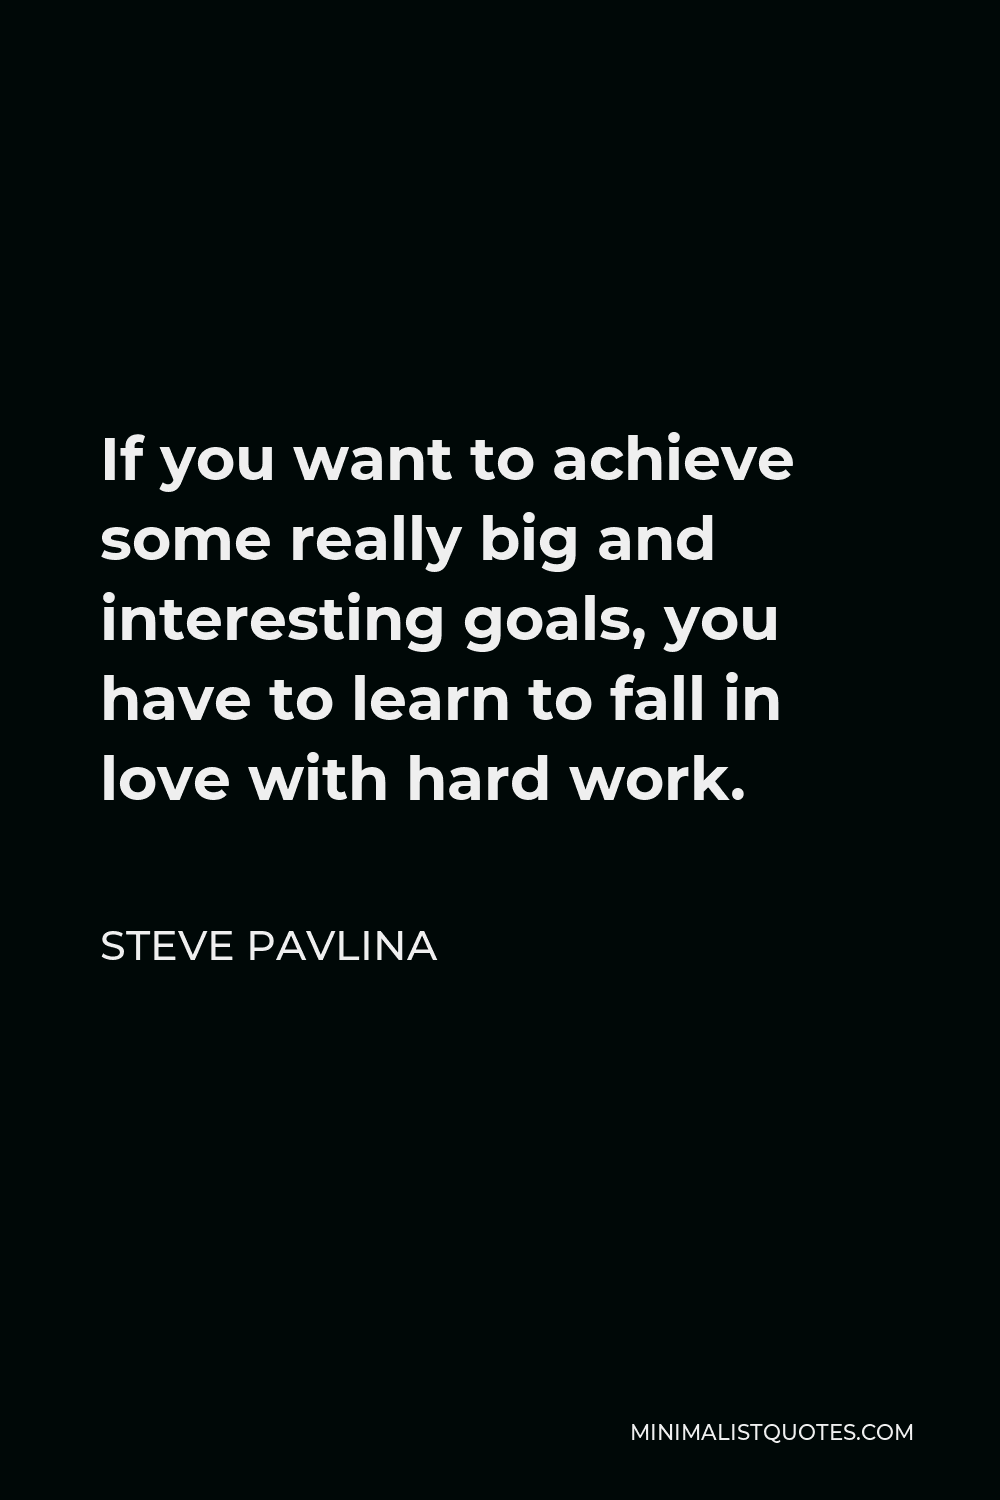 Steve Pavlina Quote - If you want to achieve some really big and interesting goals, you have to learn to fall in love with hard work.